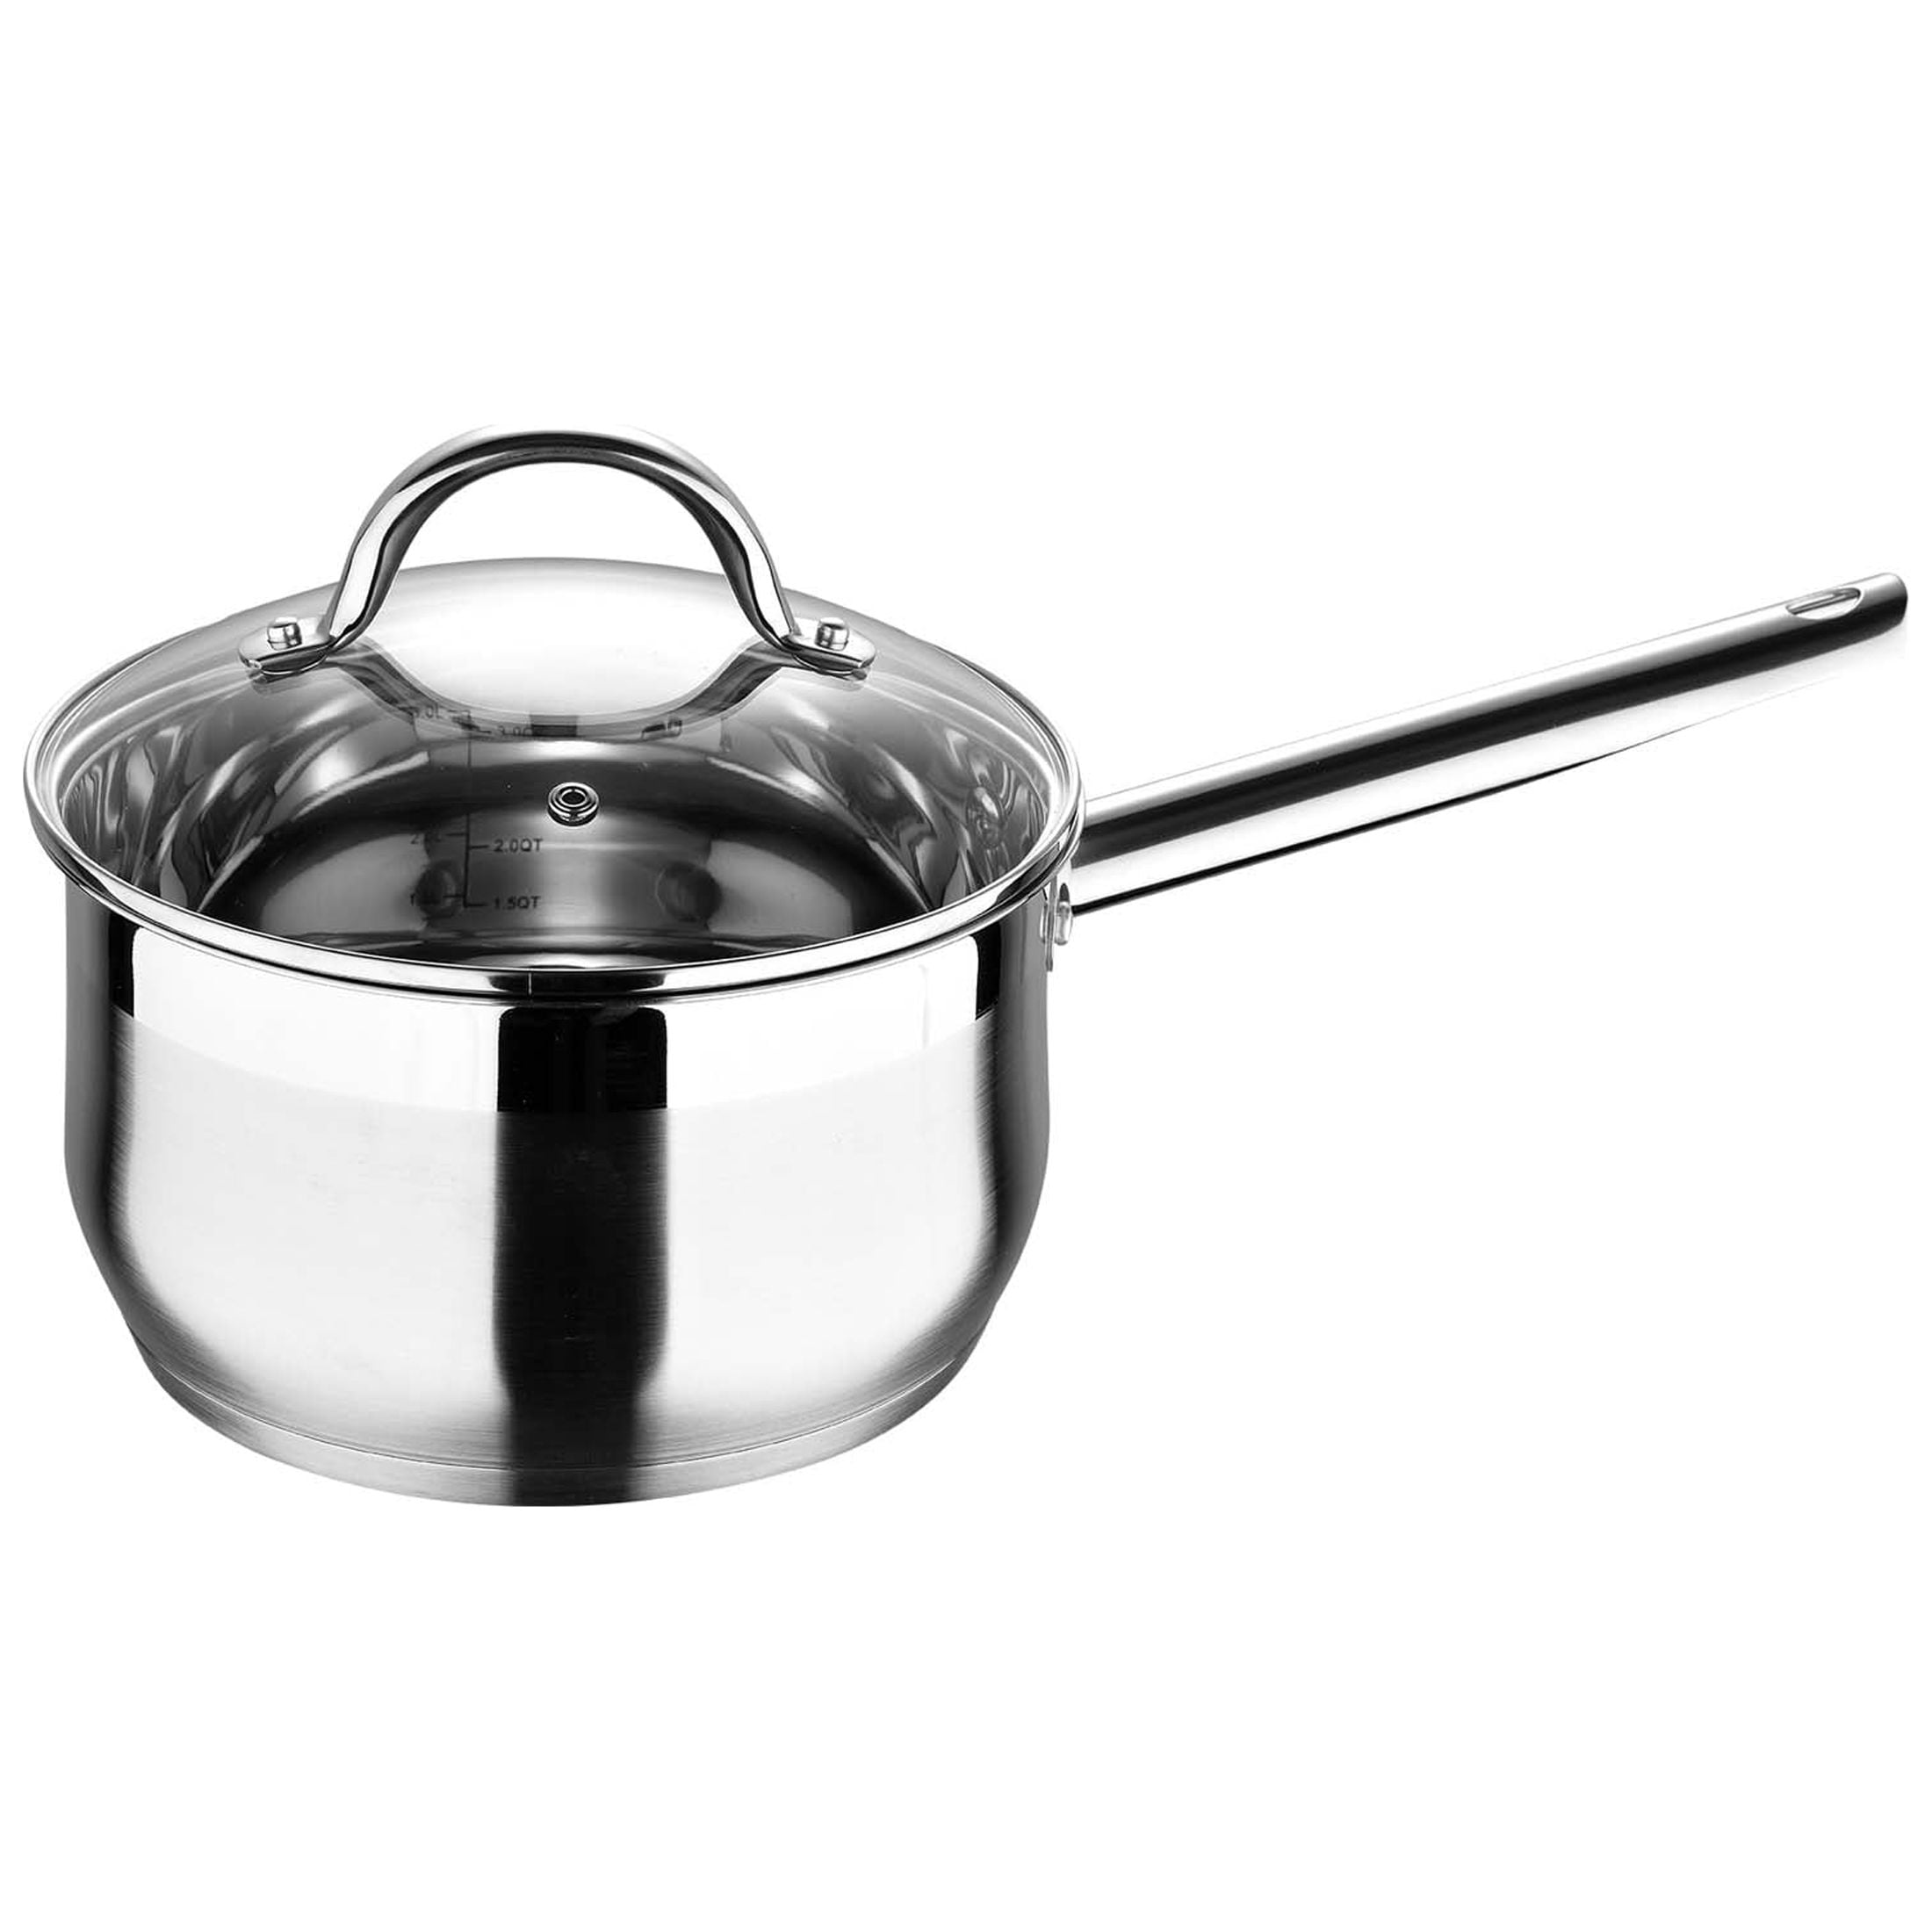 Top 4 - tea pan, stainless steel saucepans with glass lids